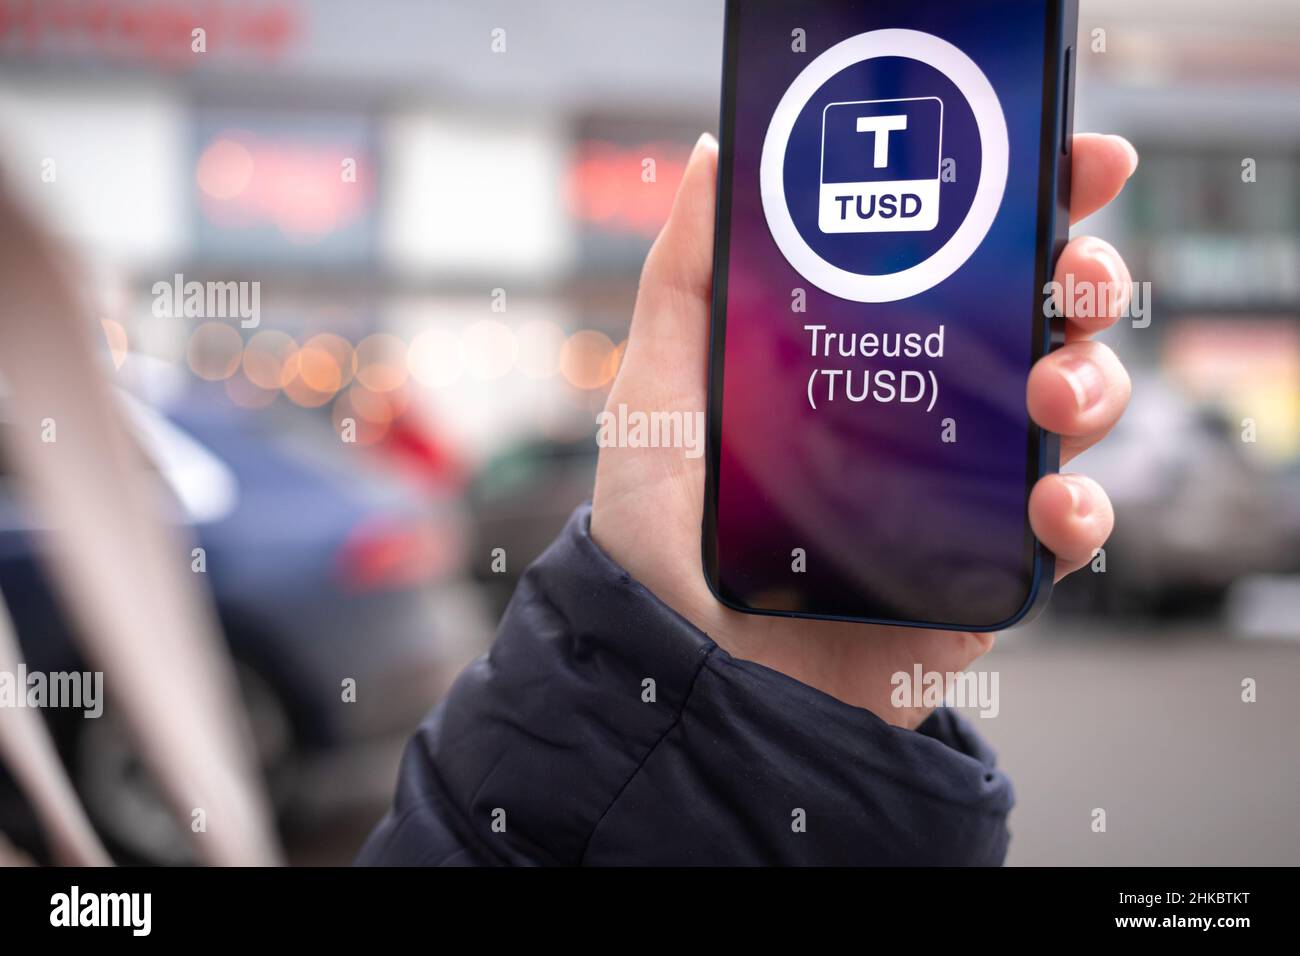 Kharkov, Ukraine - February 2, 2022: TrueUSD coin symbol. Trade with cryptocurrency, digital and virtual money, mobile banking. Hand with smartphone, Stock Photo